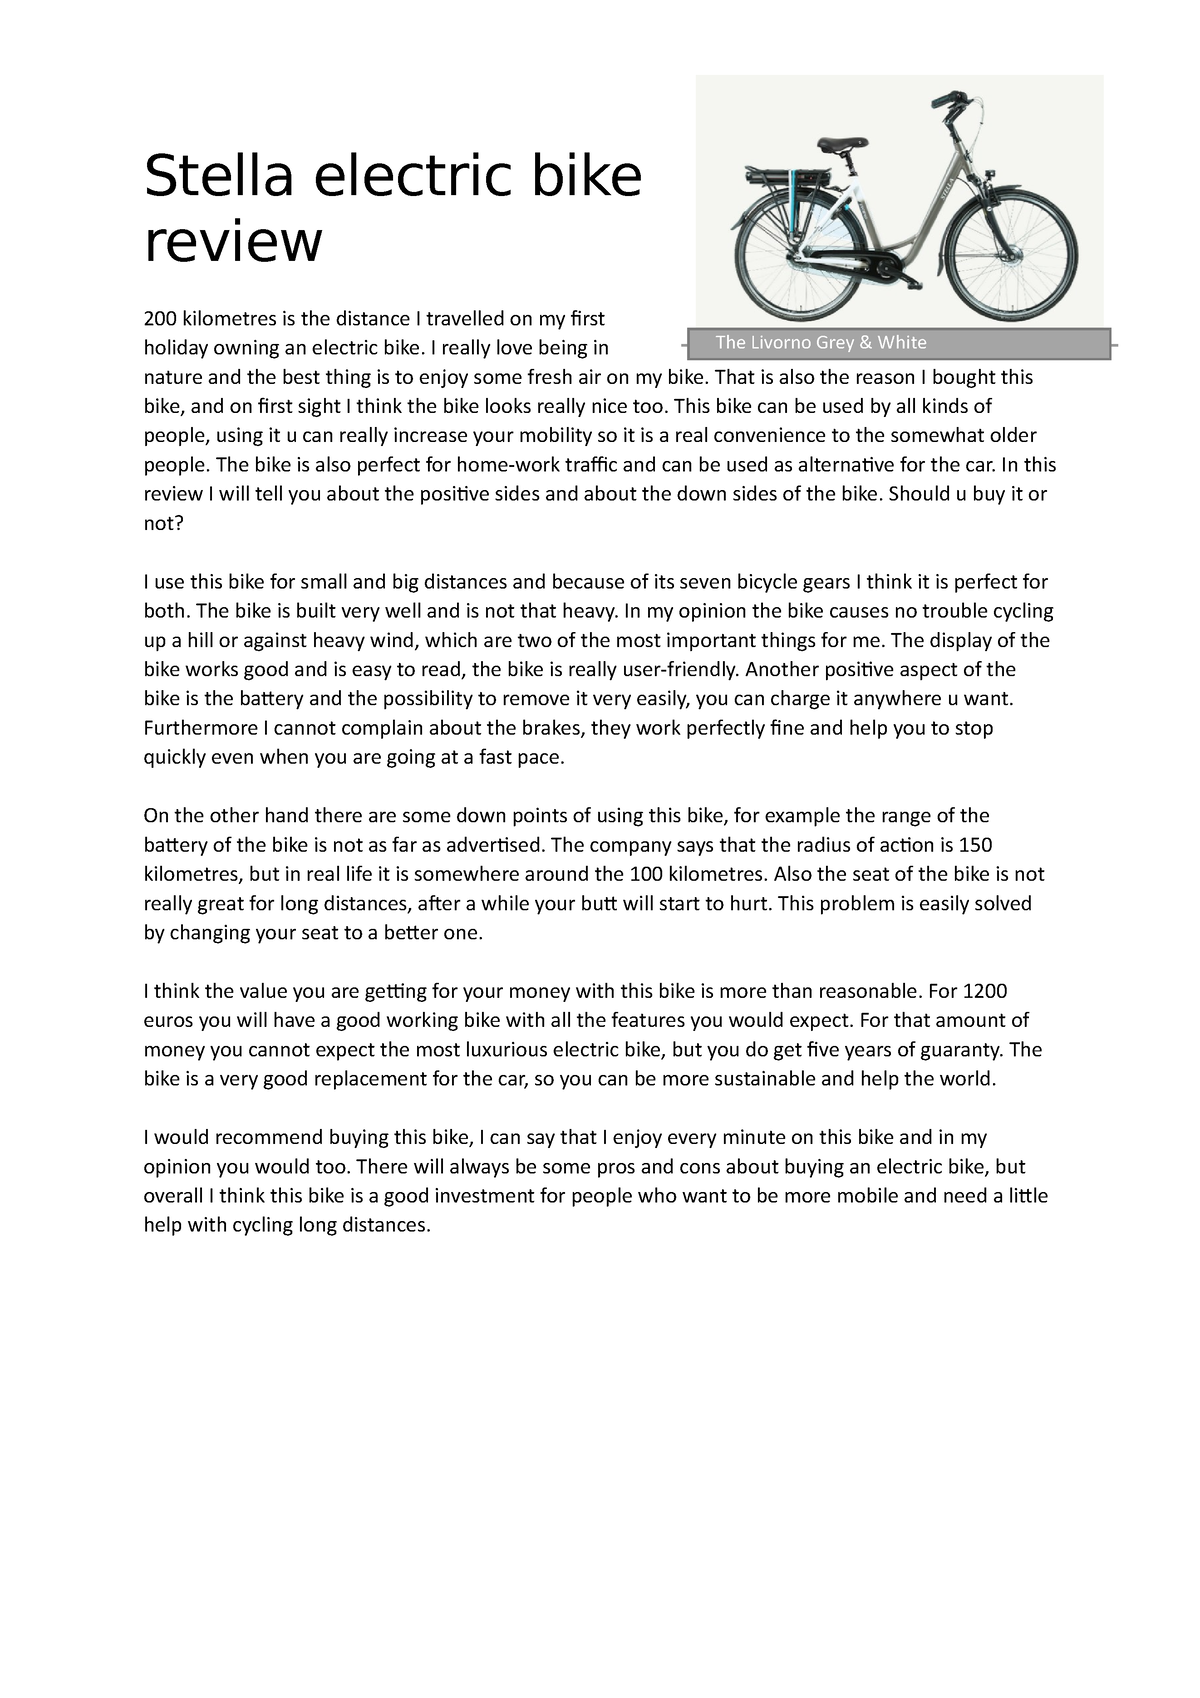 essay on electric bicycle